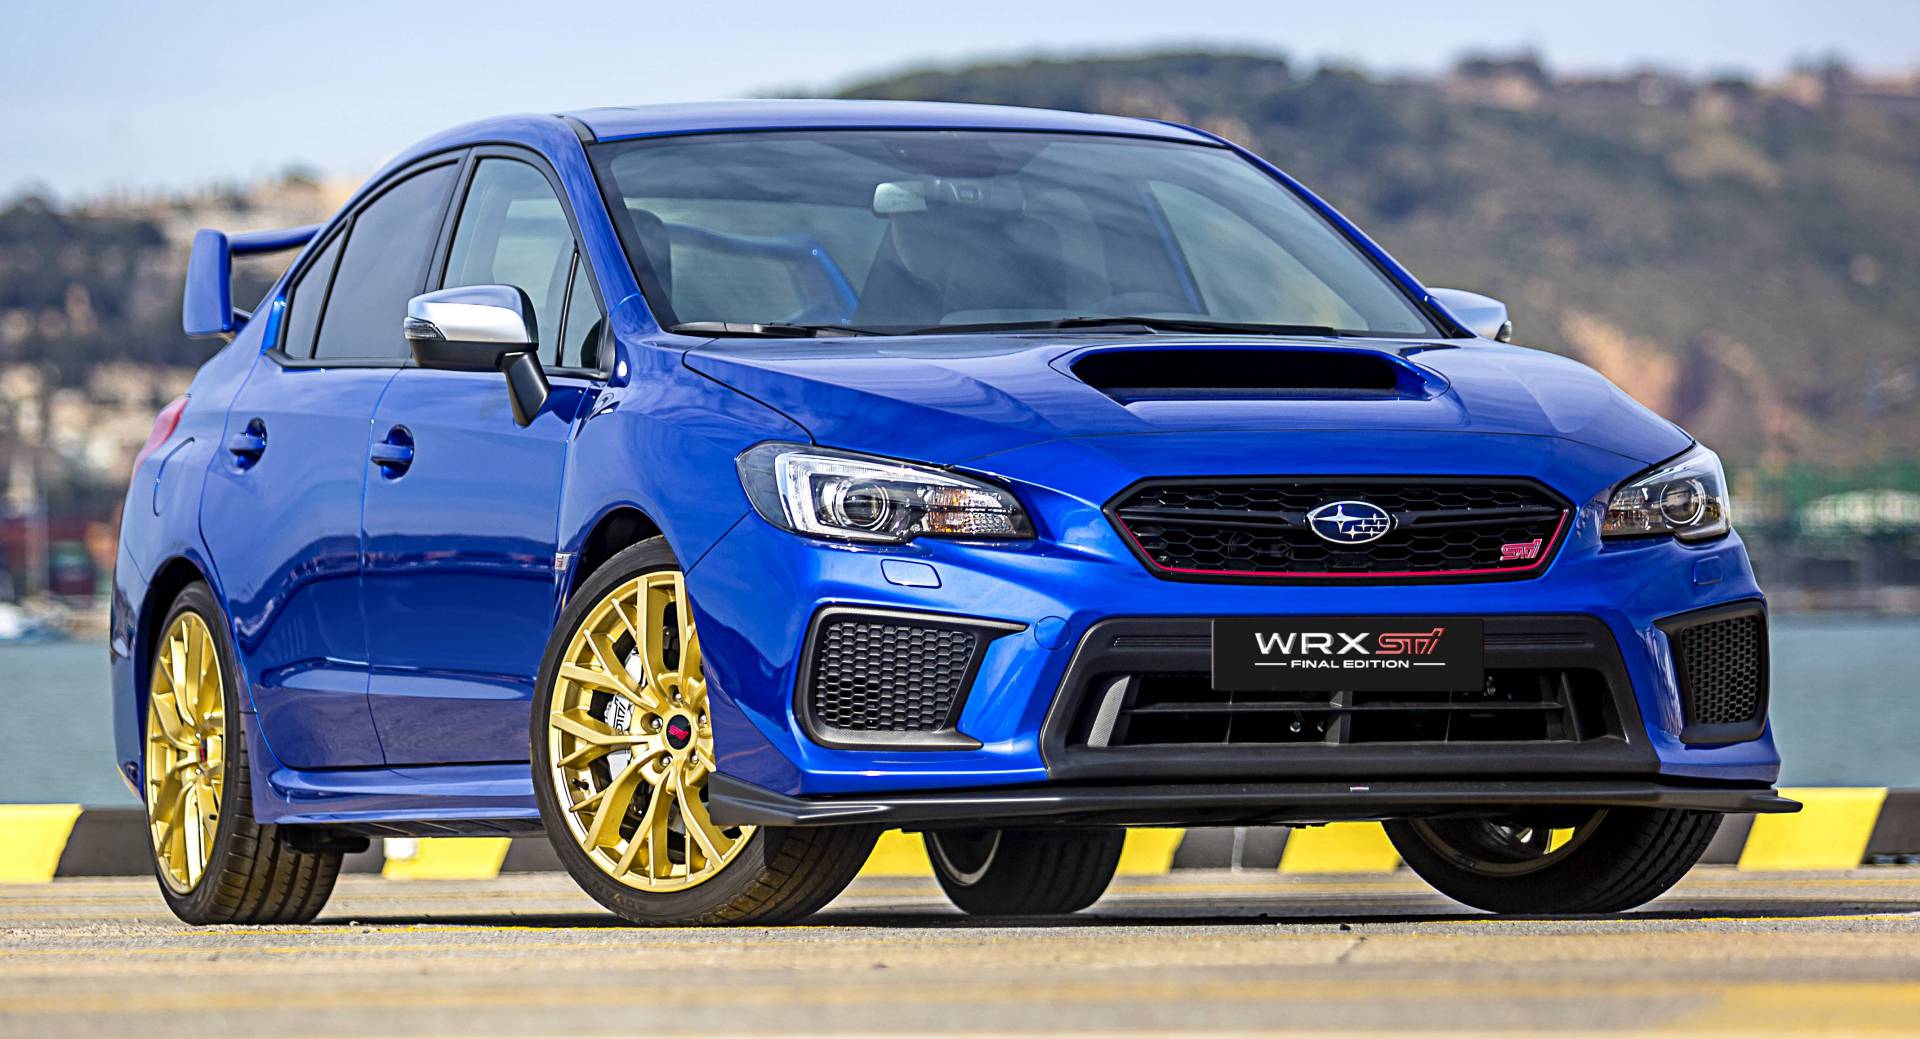 Subaru Spain Sends Off Wrx Sti With Eight Final Edition Cars Carscoops